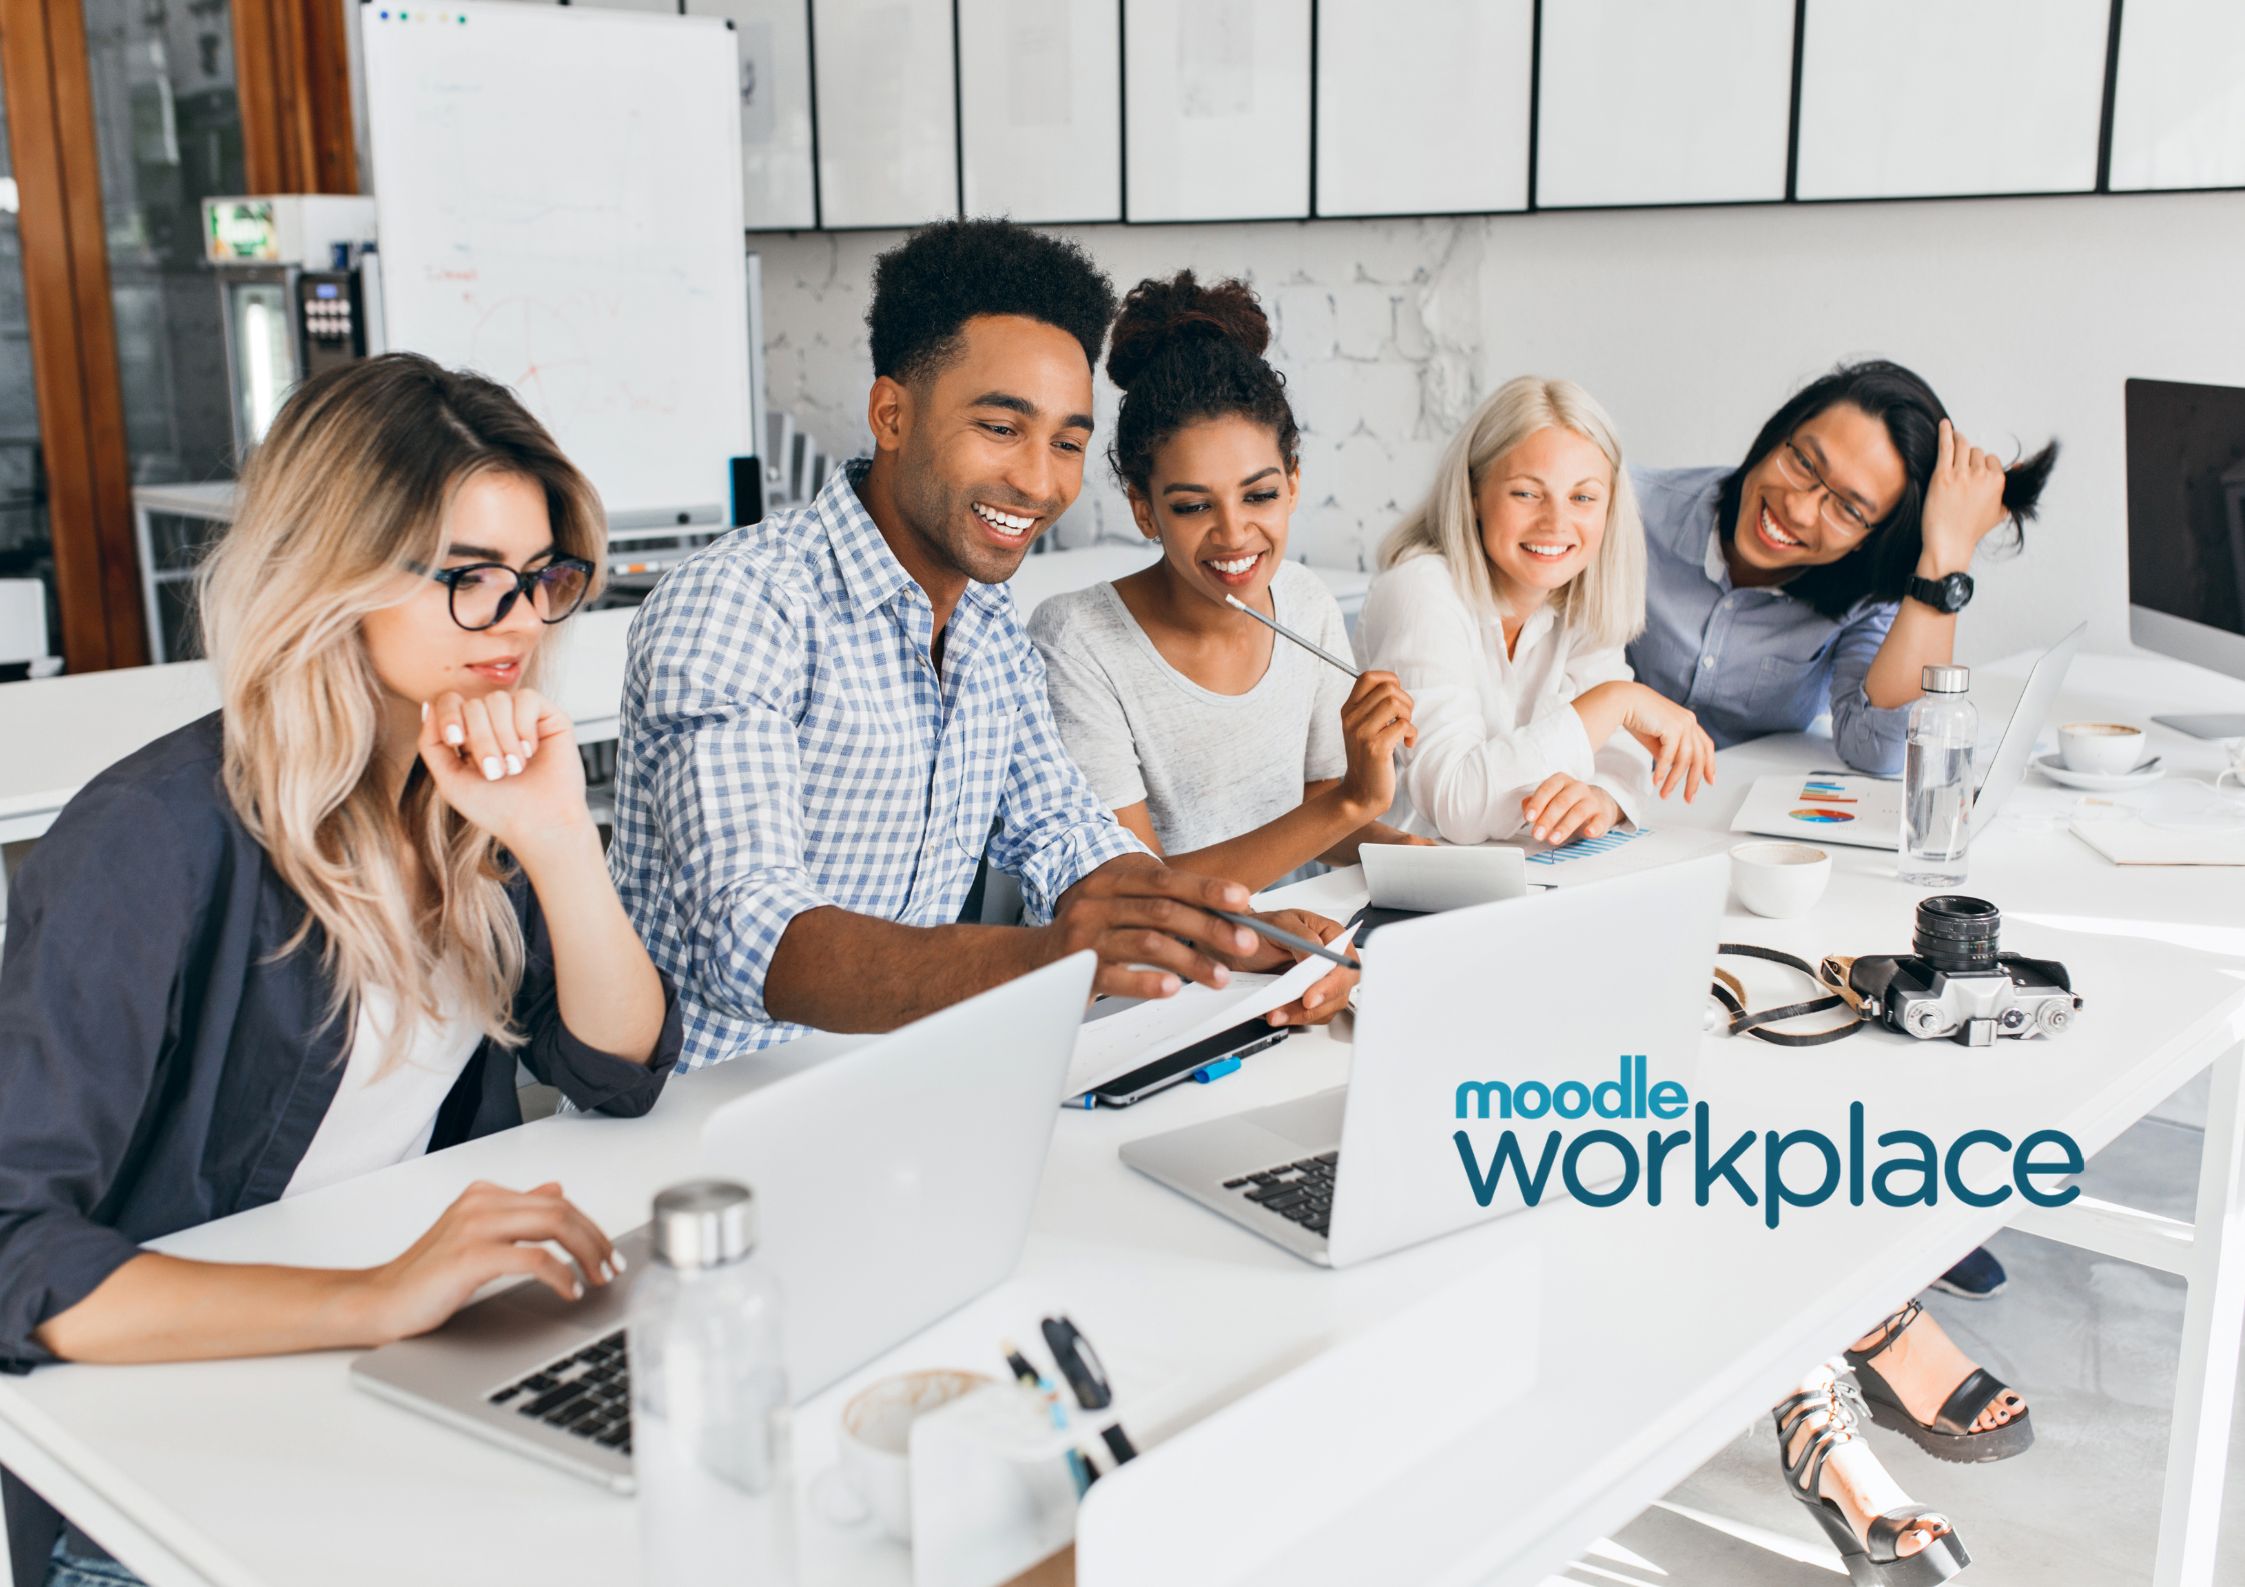 moodle-workplace